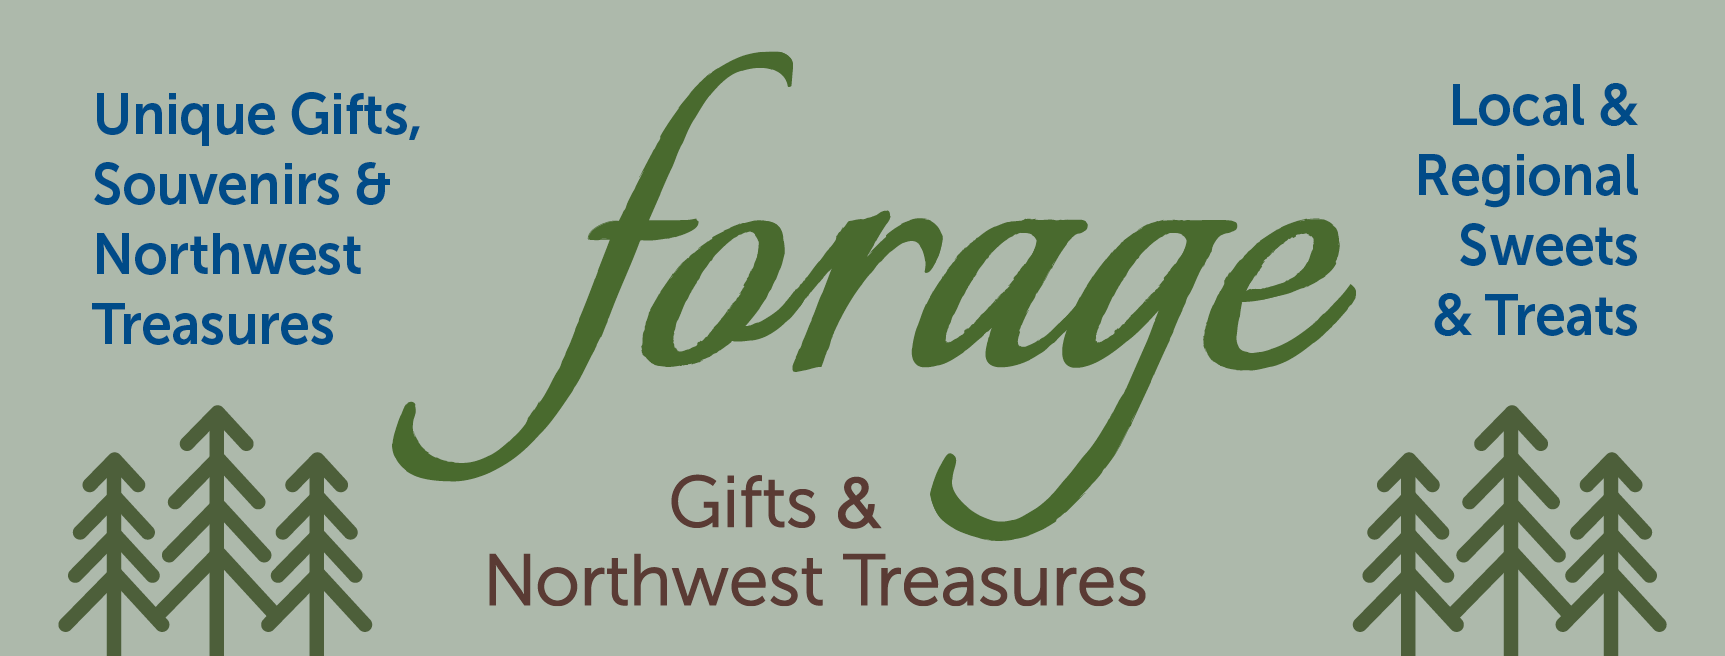 forage gifts and Northwest treasures